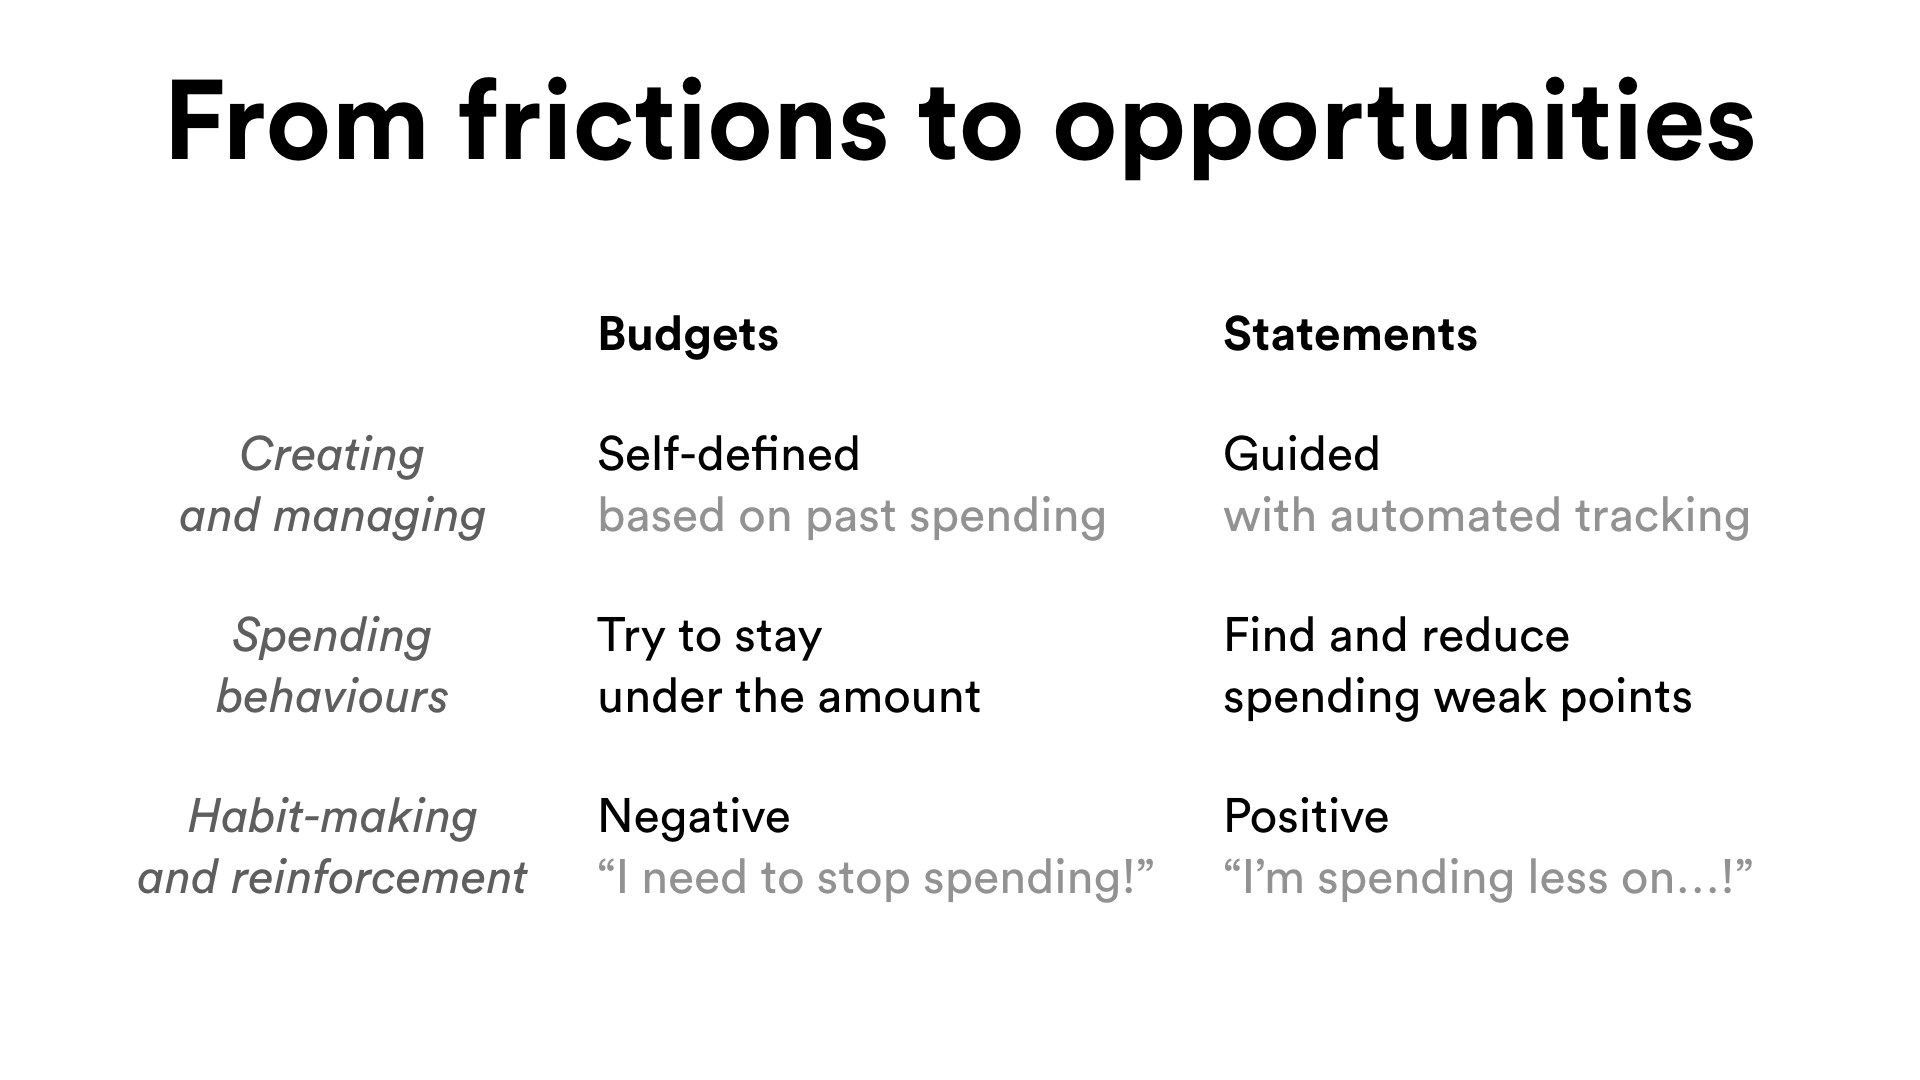 Frictions and opportunities with budgeting and Statements